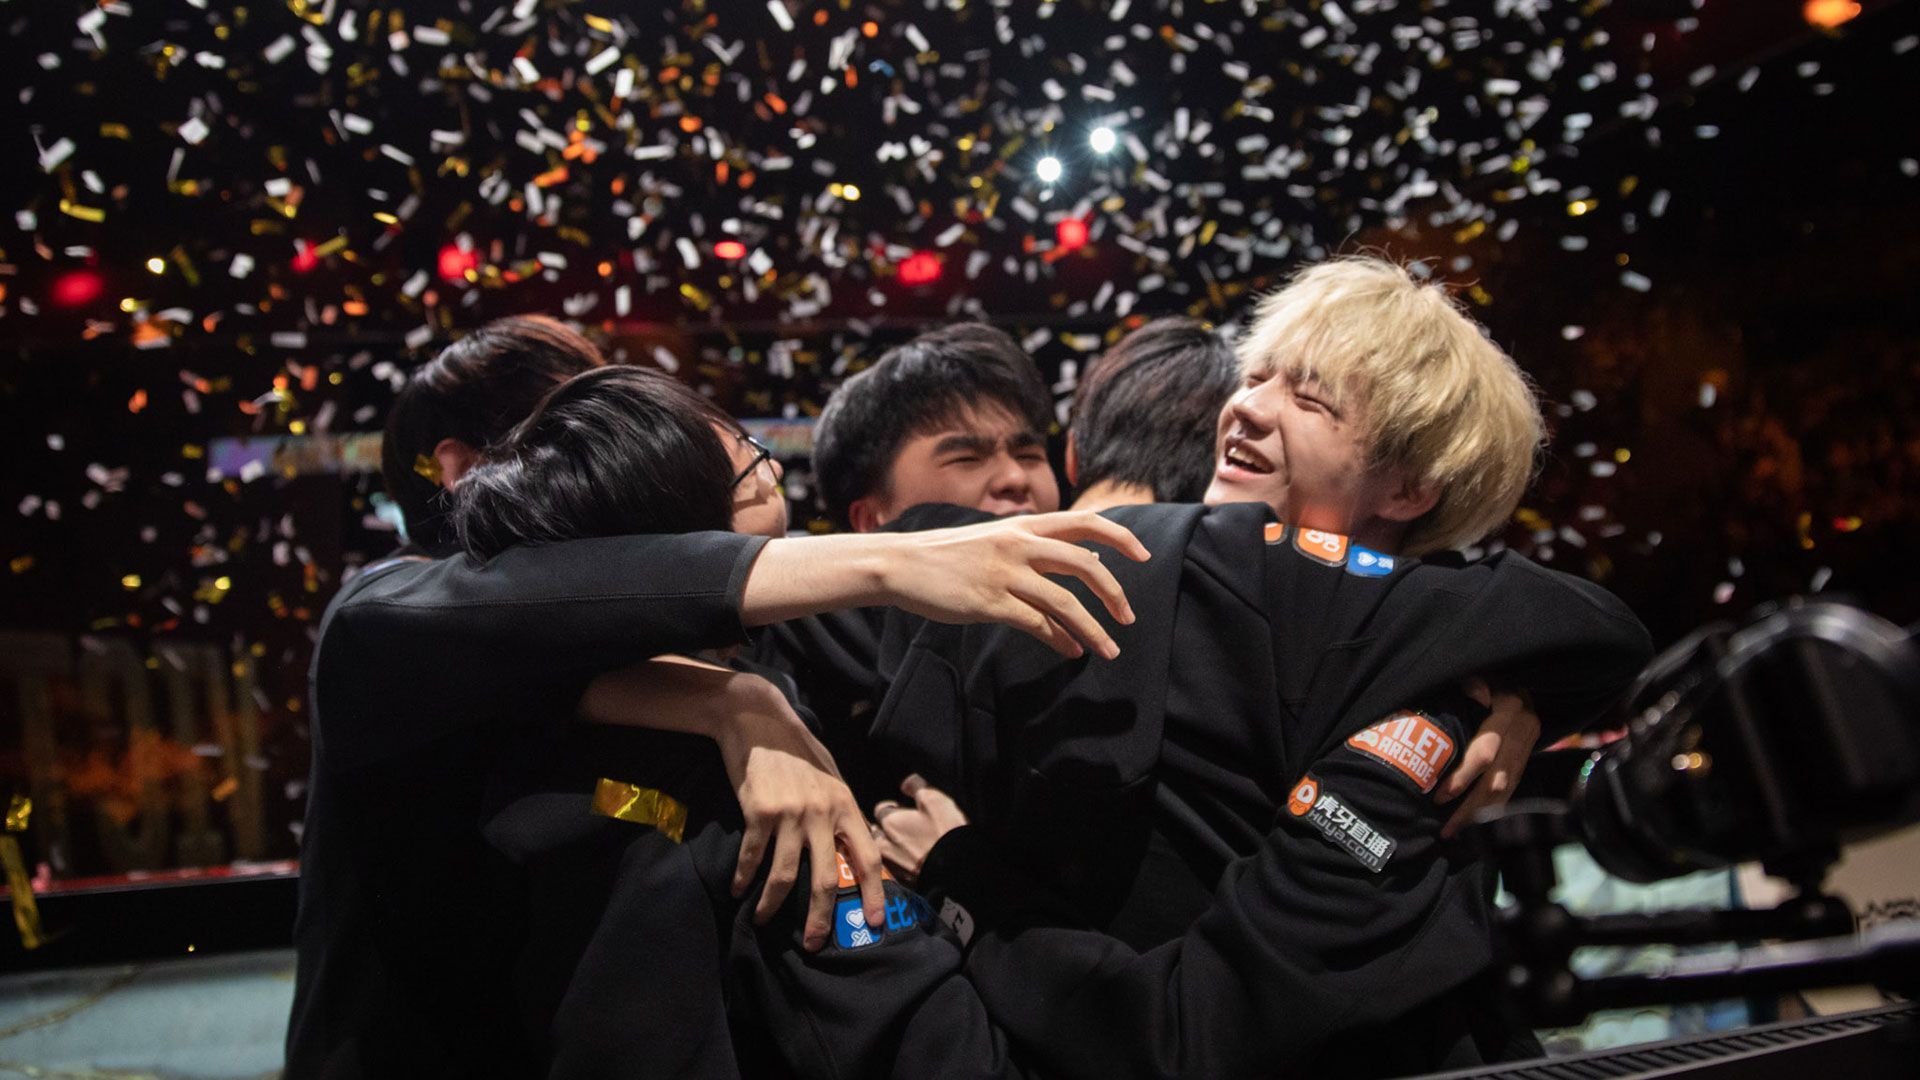 Invictus Gaming wins coveted League of Legends Worlds title for China